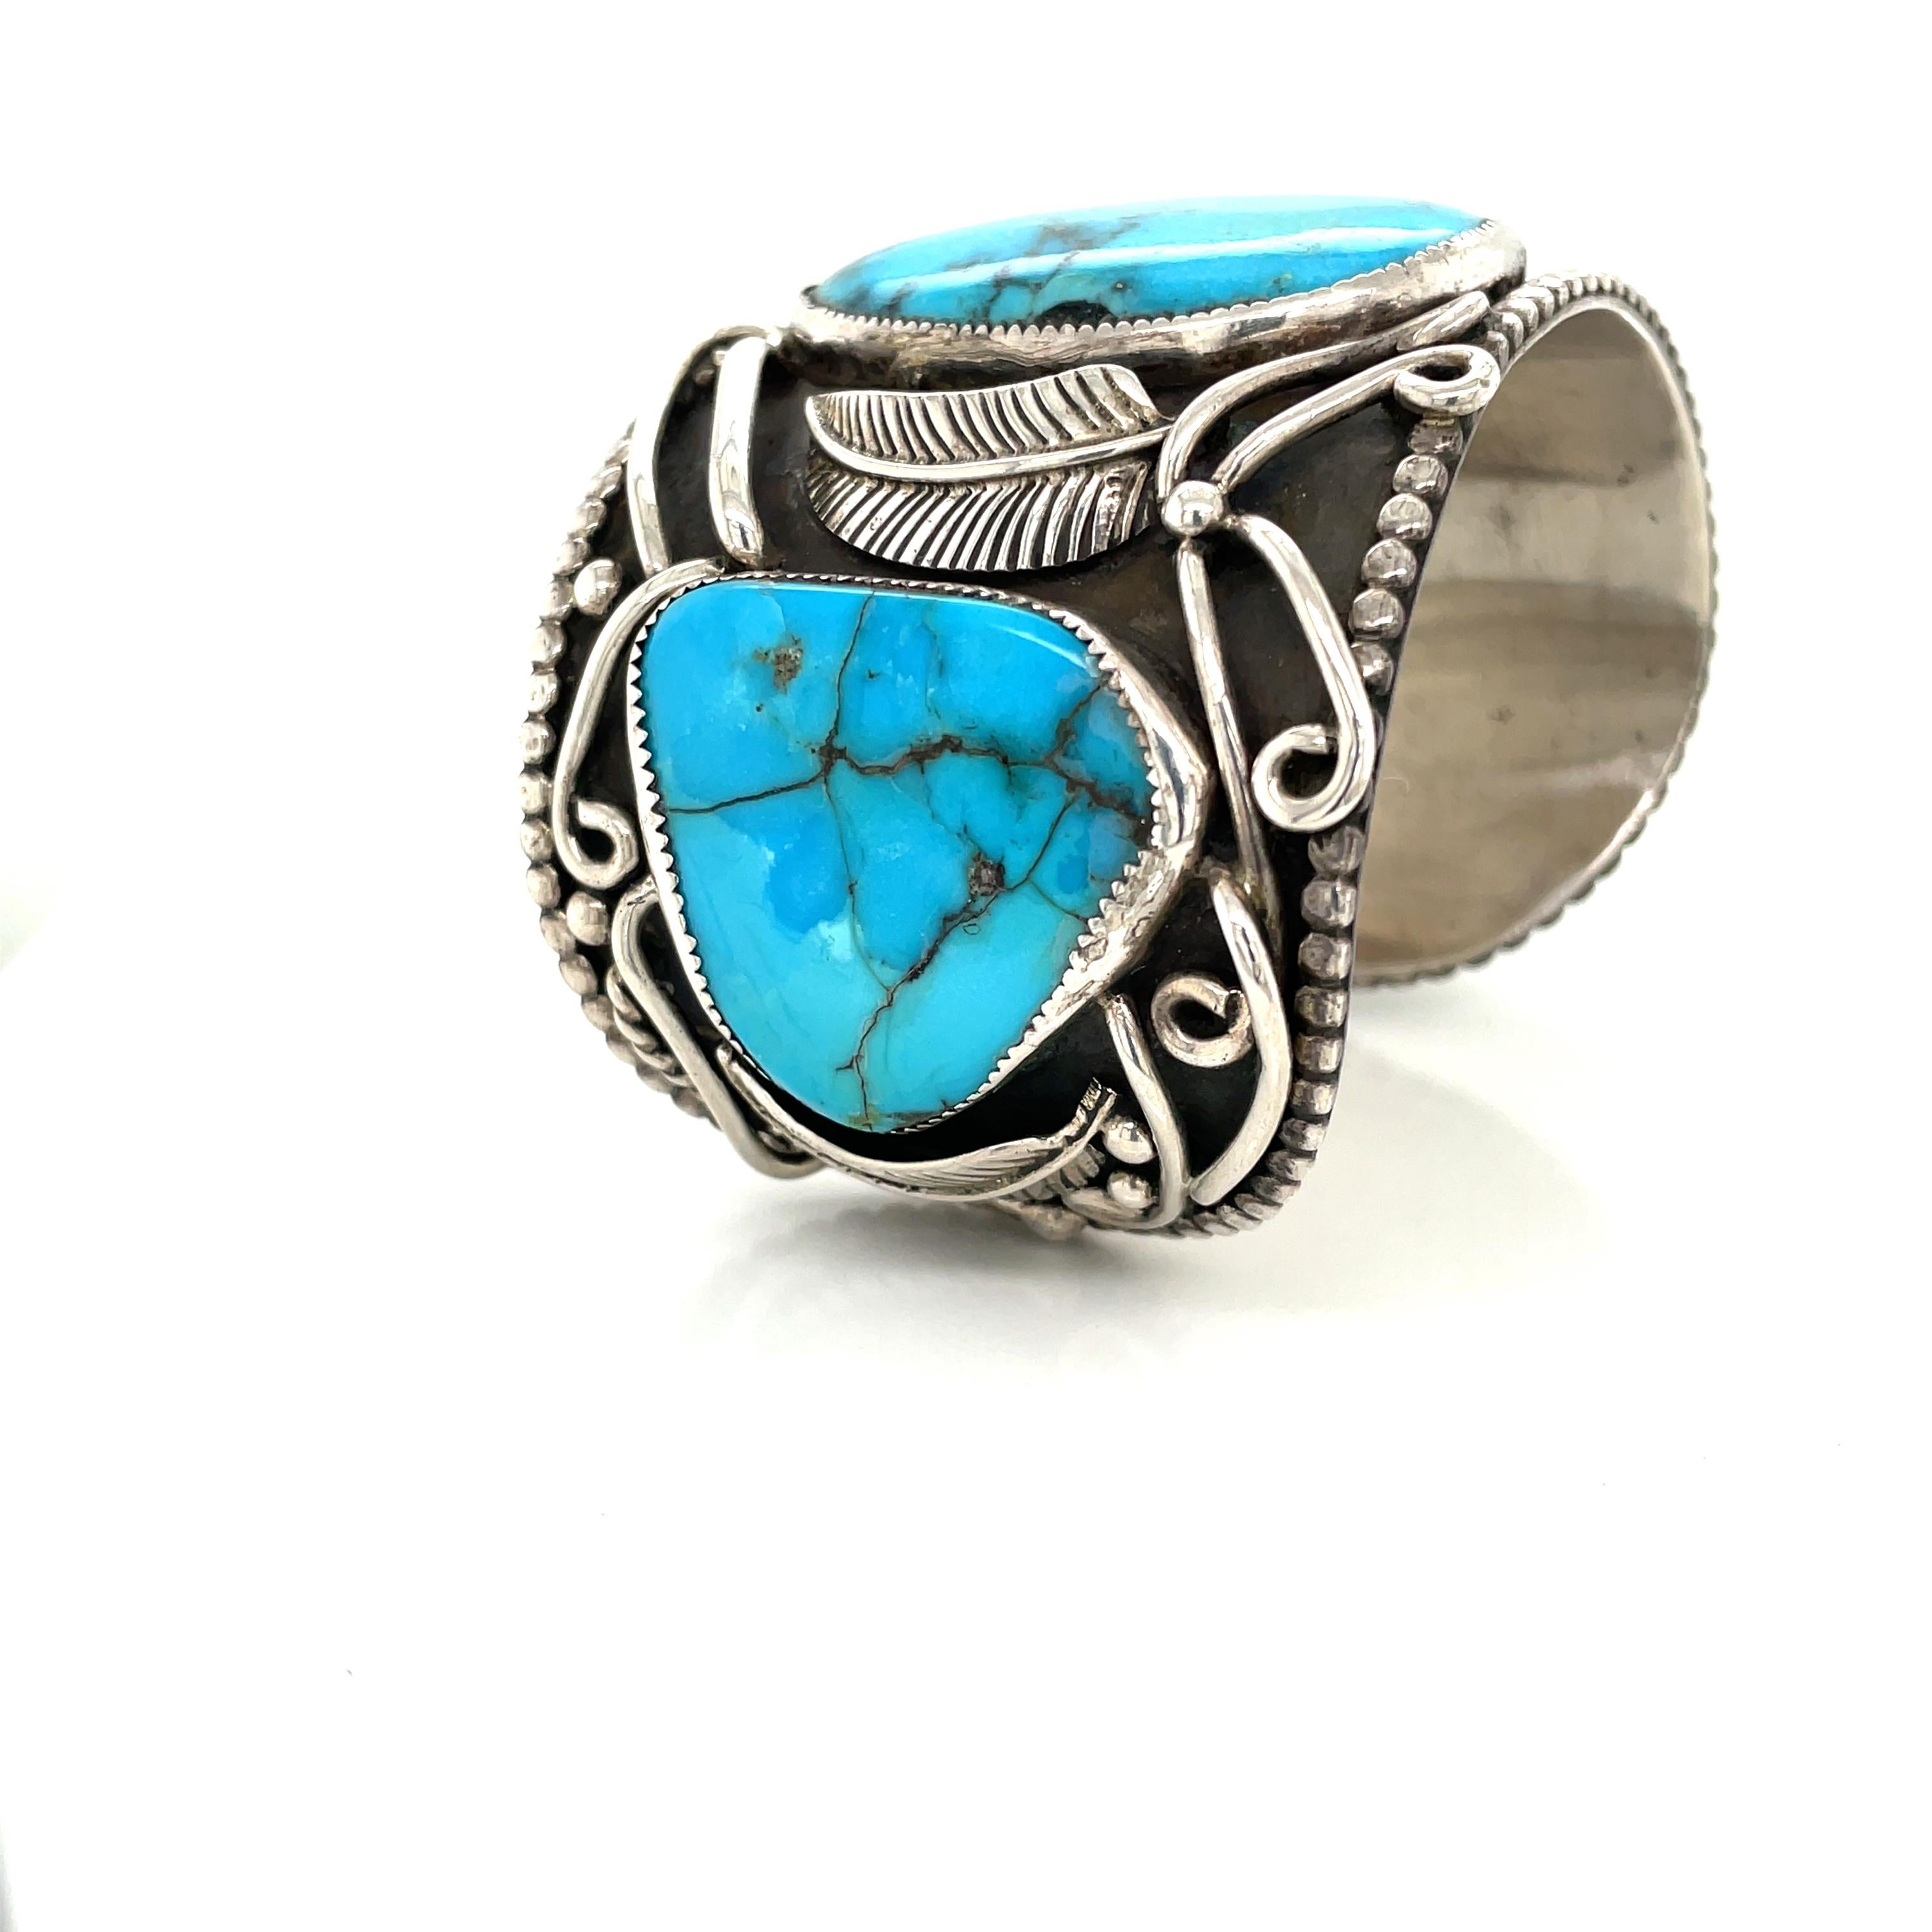 Uncut Native American Turquoise Sterling Silver Cuff Bracelet For Sale